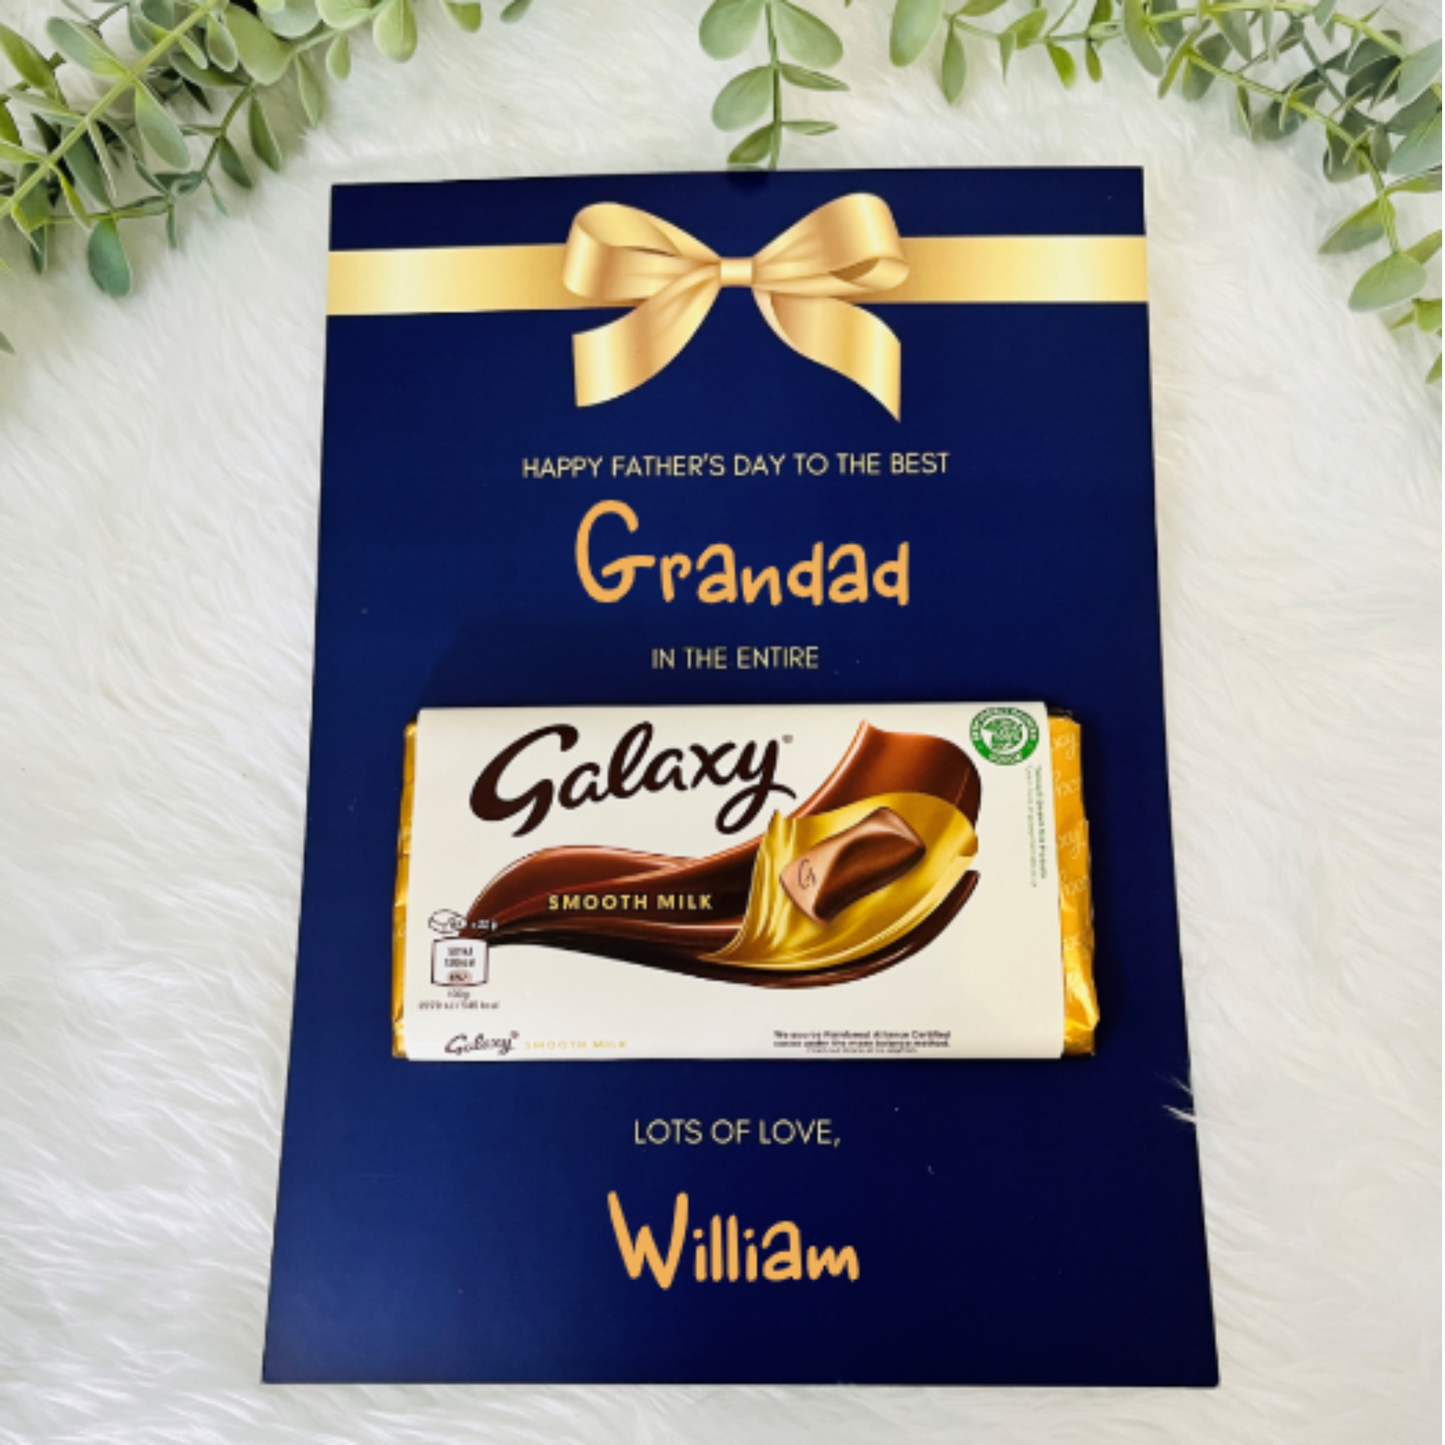 Personalised Chocolate A4 Galaxy Board for Fathers Day, The best in the Galaxy Gift, Fathers Day gift for Dad